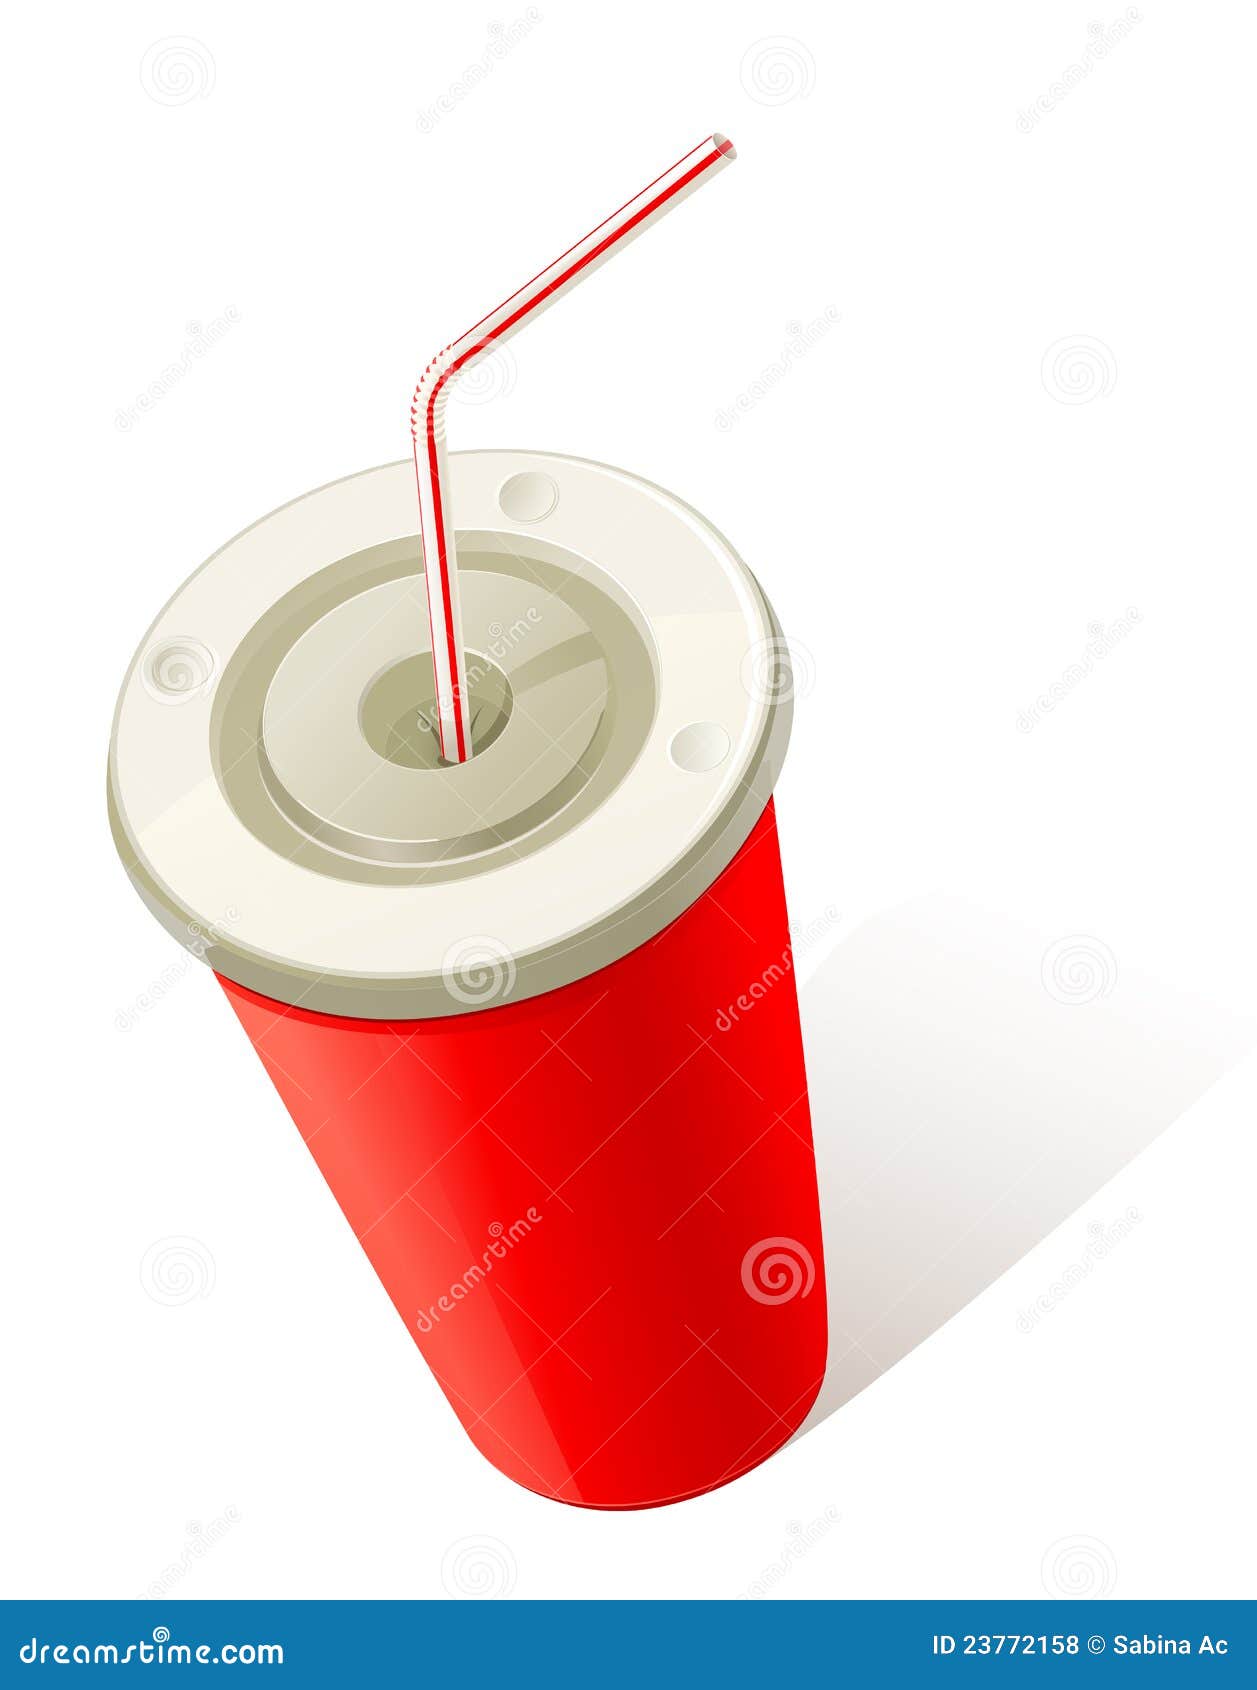 287,800+ Soft Drink Cup Stock Illustrations, Royalty-Free Vector